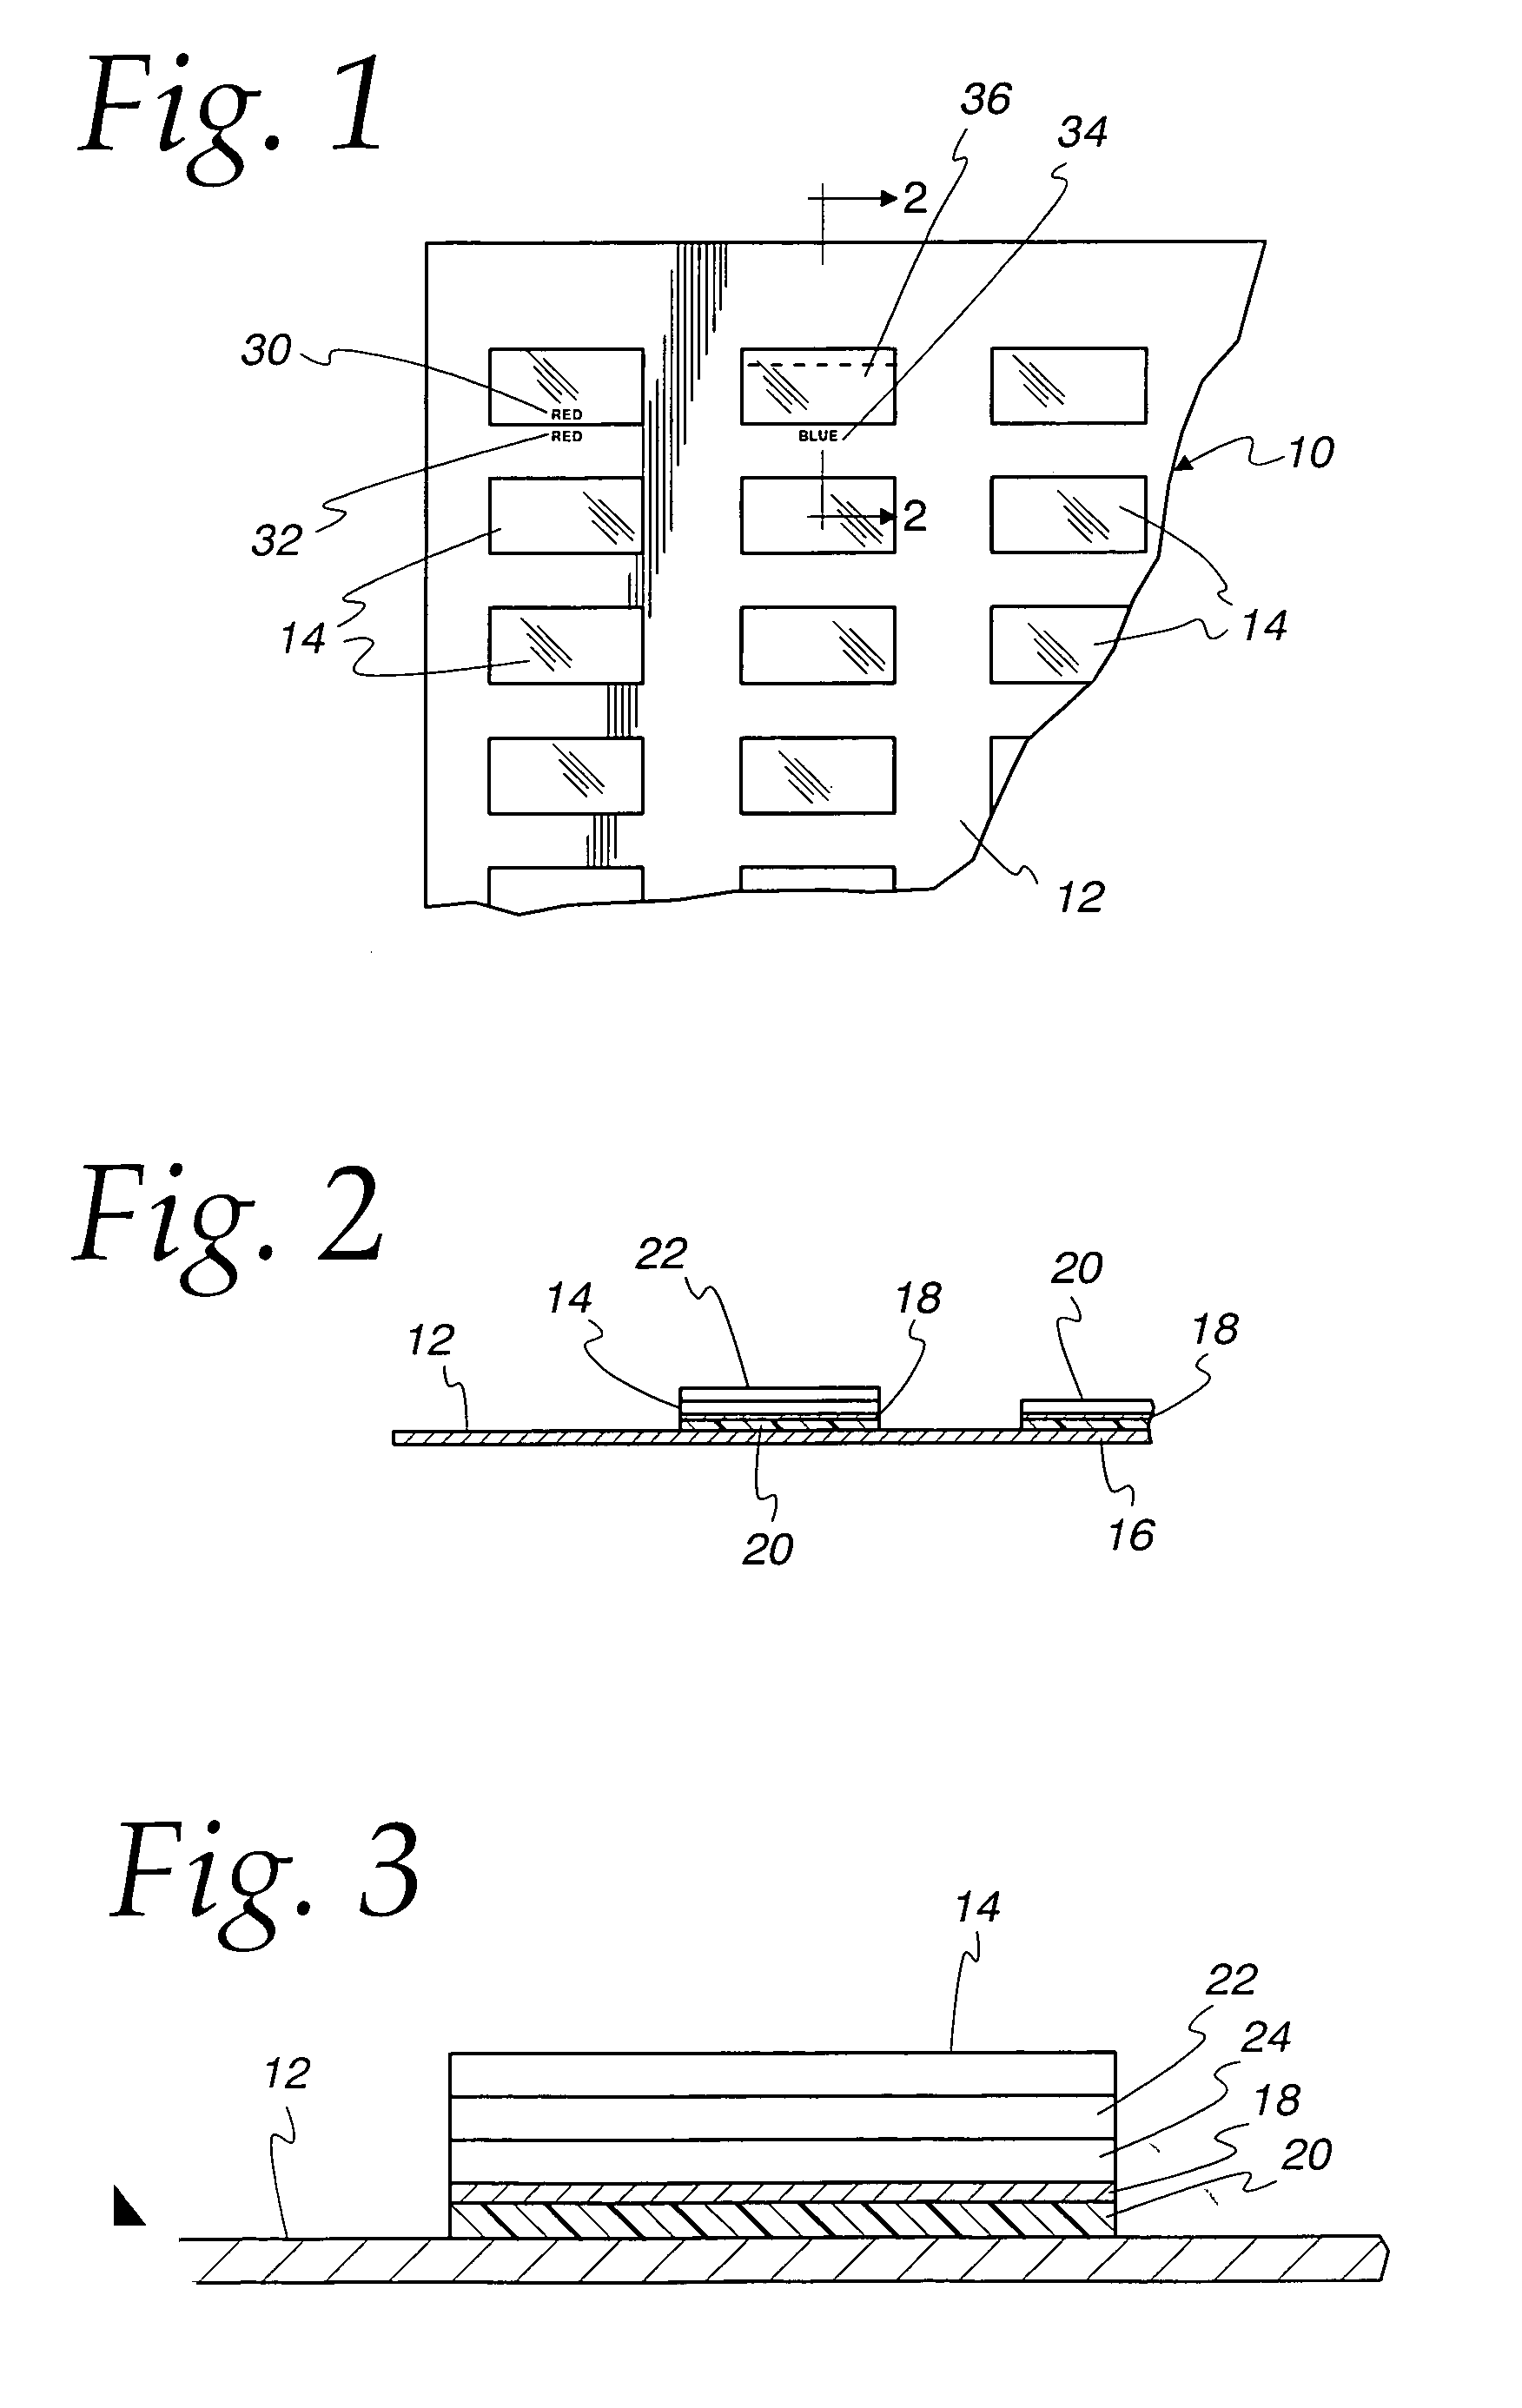 Color display product with removable color chips and a method for making same